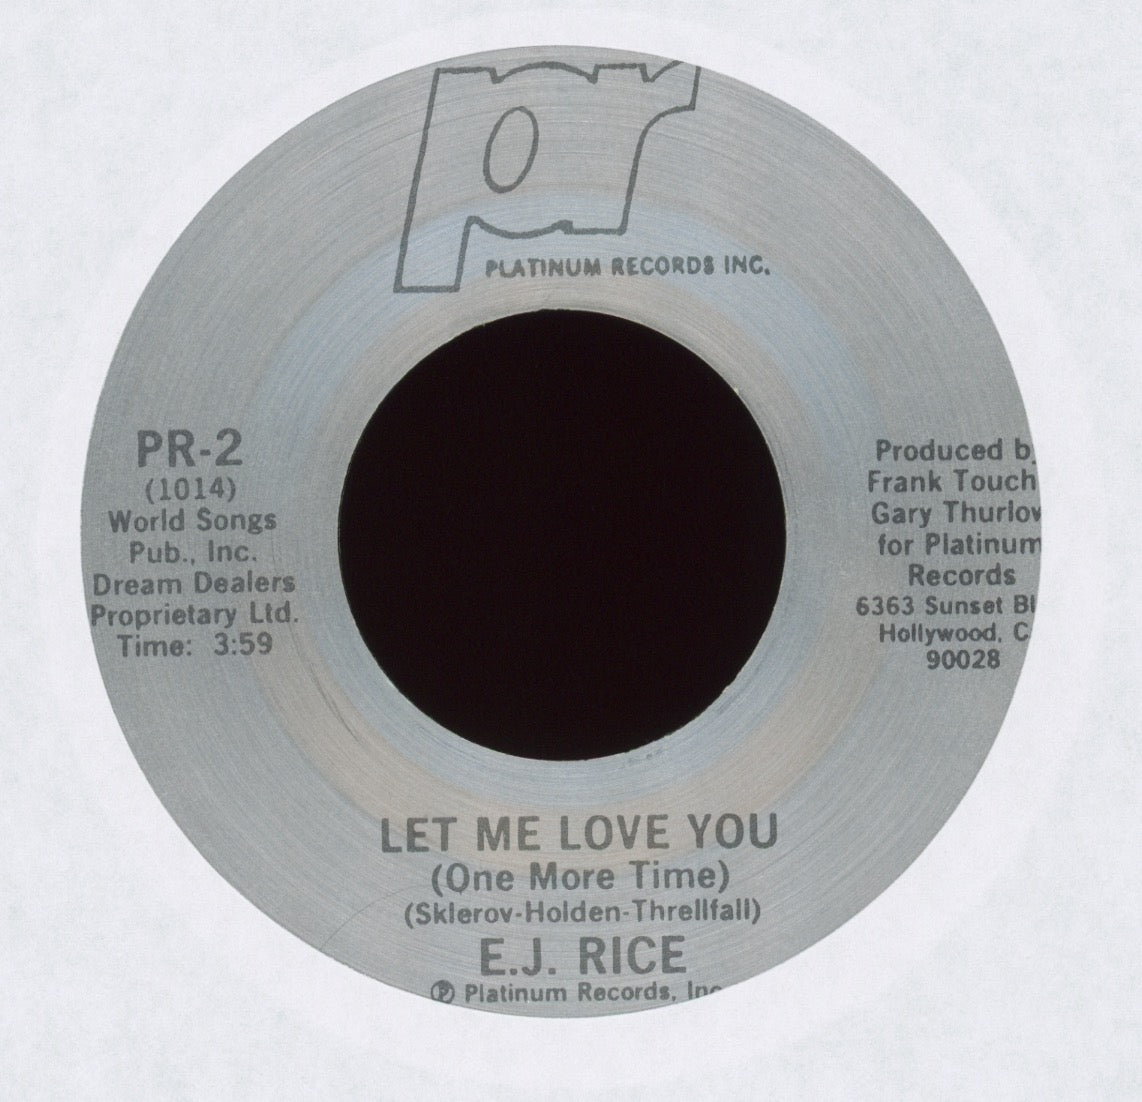 E.J. Rice - Will You Be Coming Back on Platinum Records